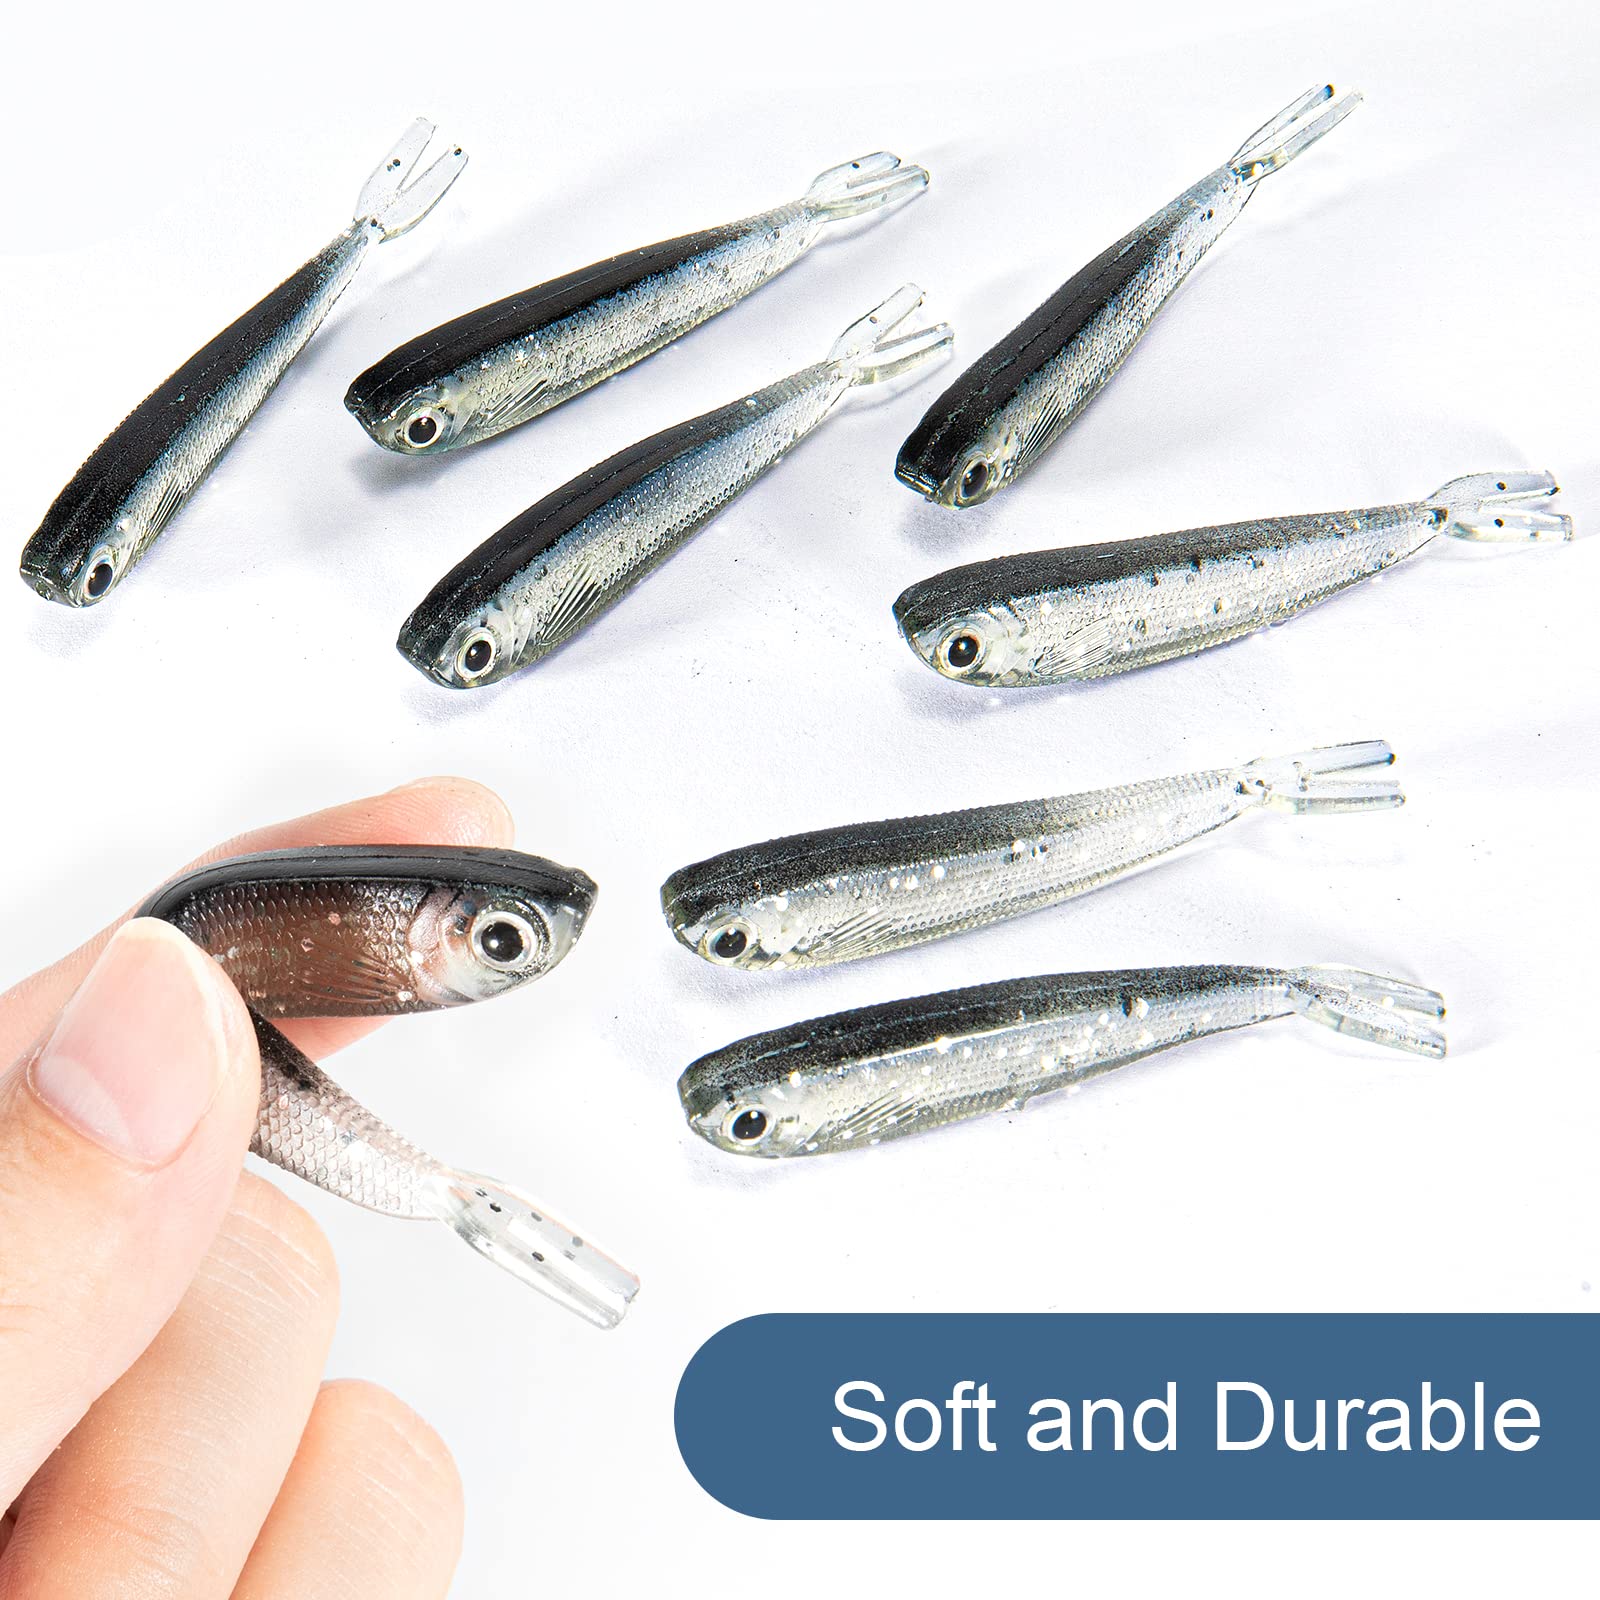 ARTICLE - Fishing Soft Plastic Baits Part 3 - Articles - DECKEE